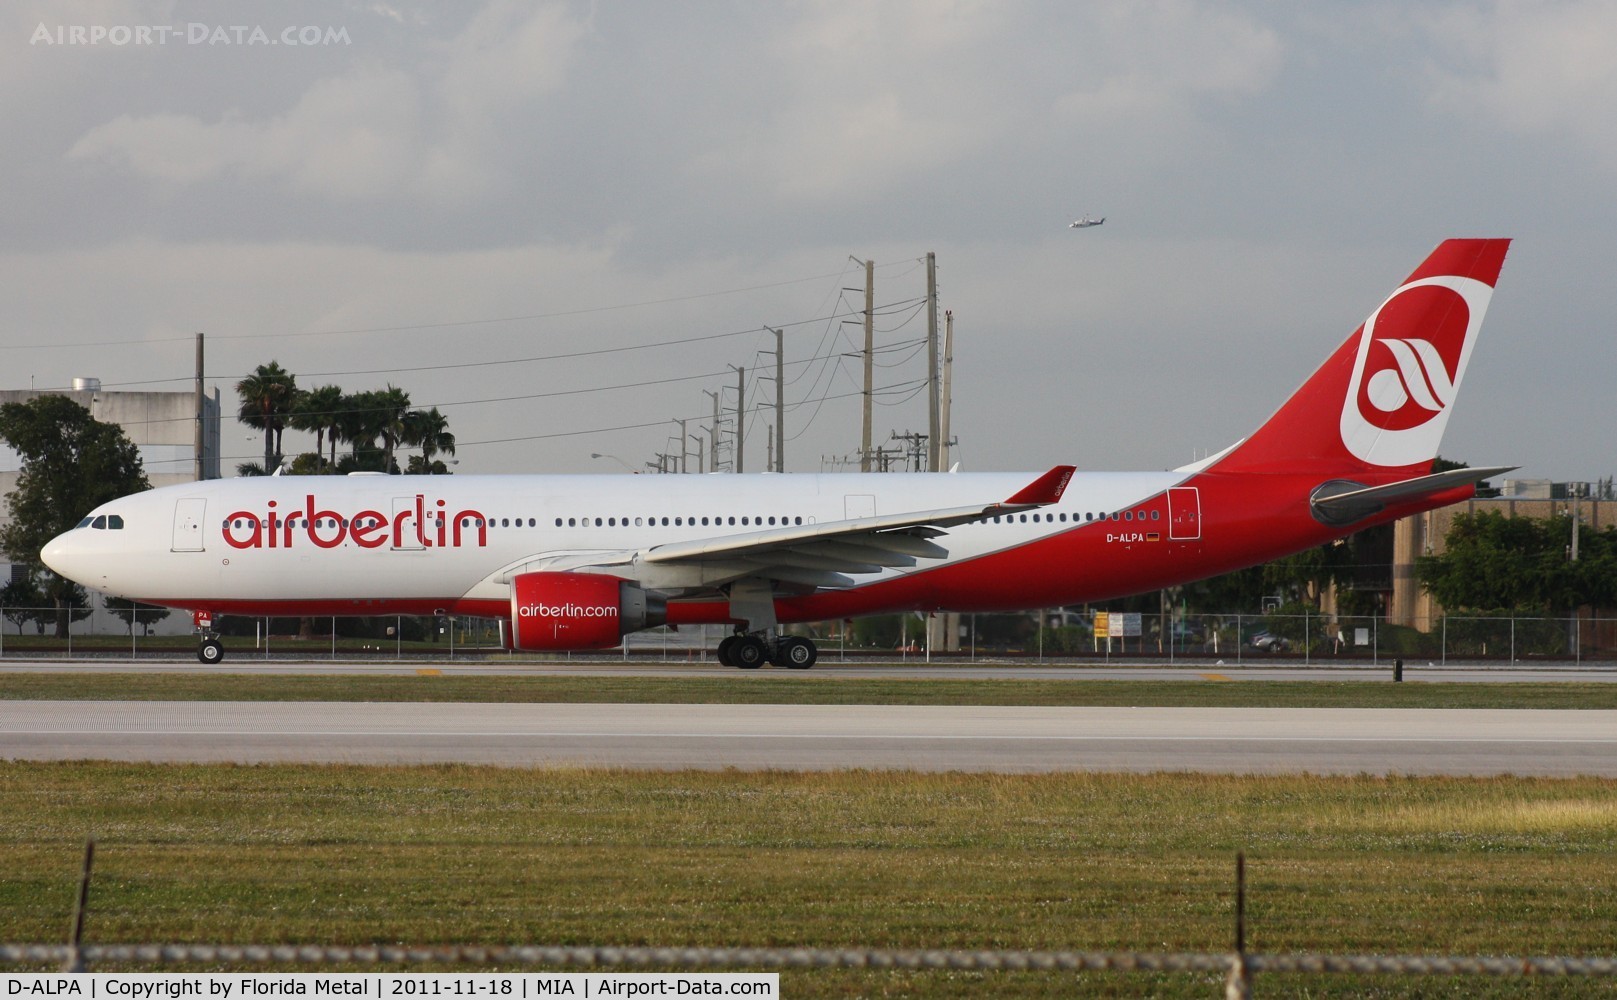 D-ALPA, 2001 Airbus A330-223 C/N 403, Air Berlin was one of the very few non cargo planes to depart on Runway 9 that day